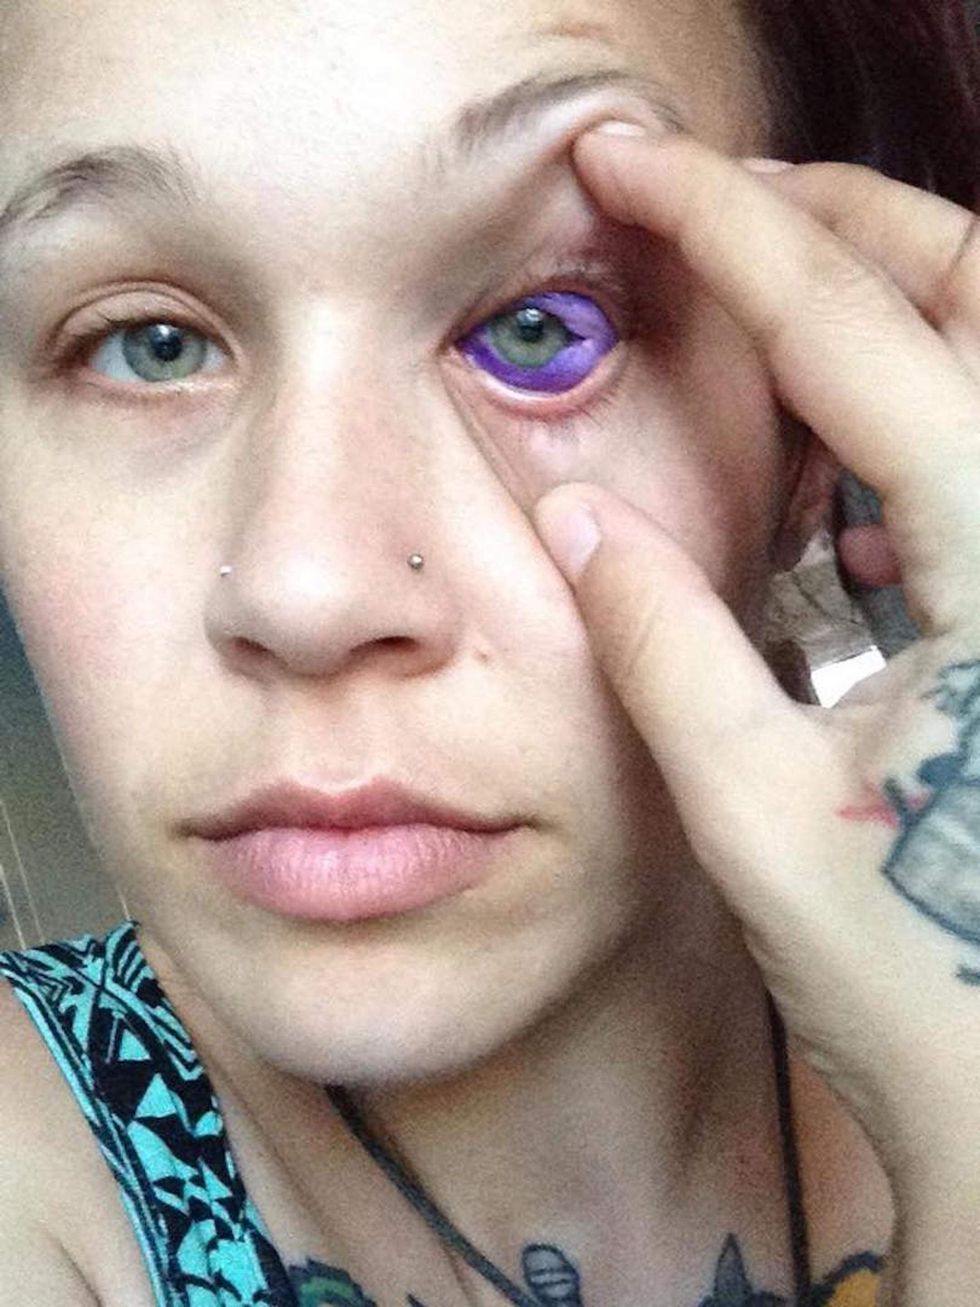 This model got an eyeball tattoo, and of course it went horribly wrong